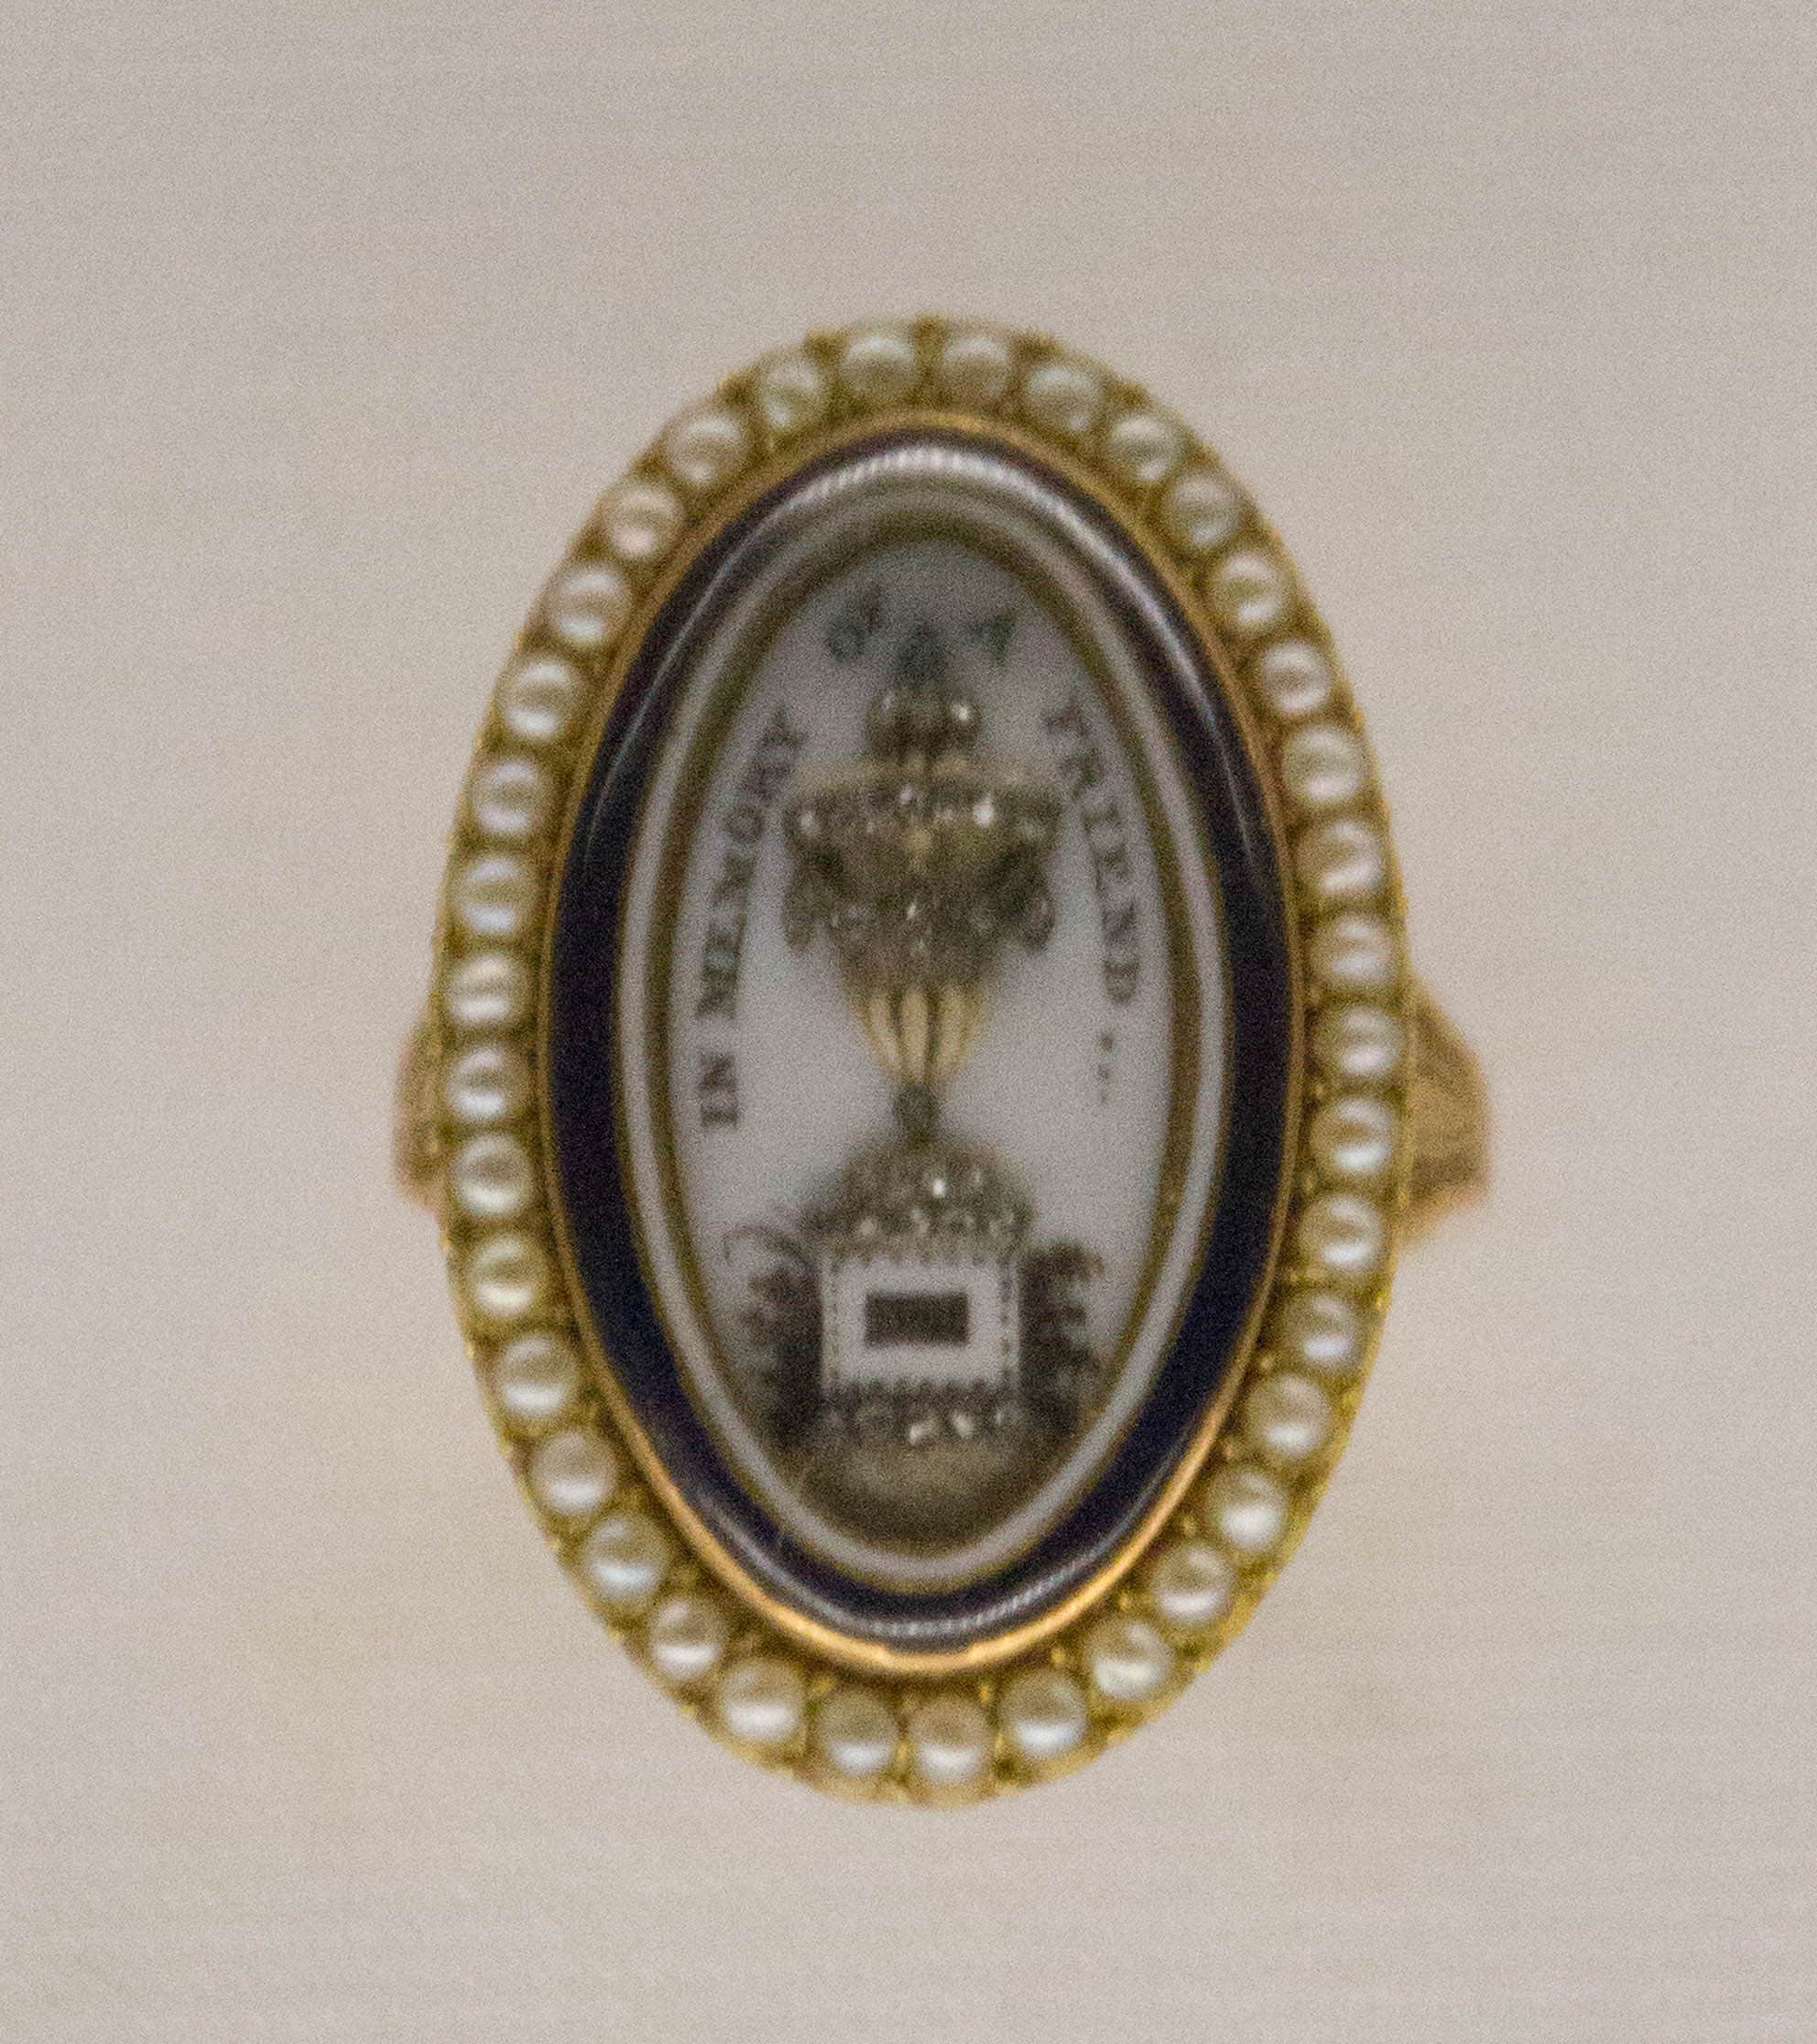 English Mourning Ring. This item is displayed in the Schmuckmuseum in Pforzheim, Germany.